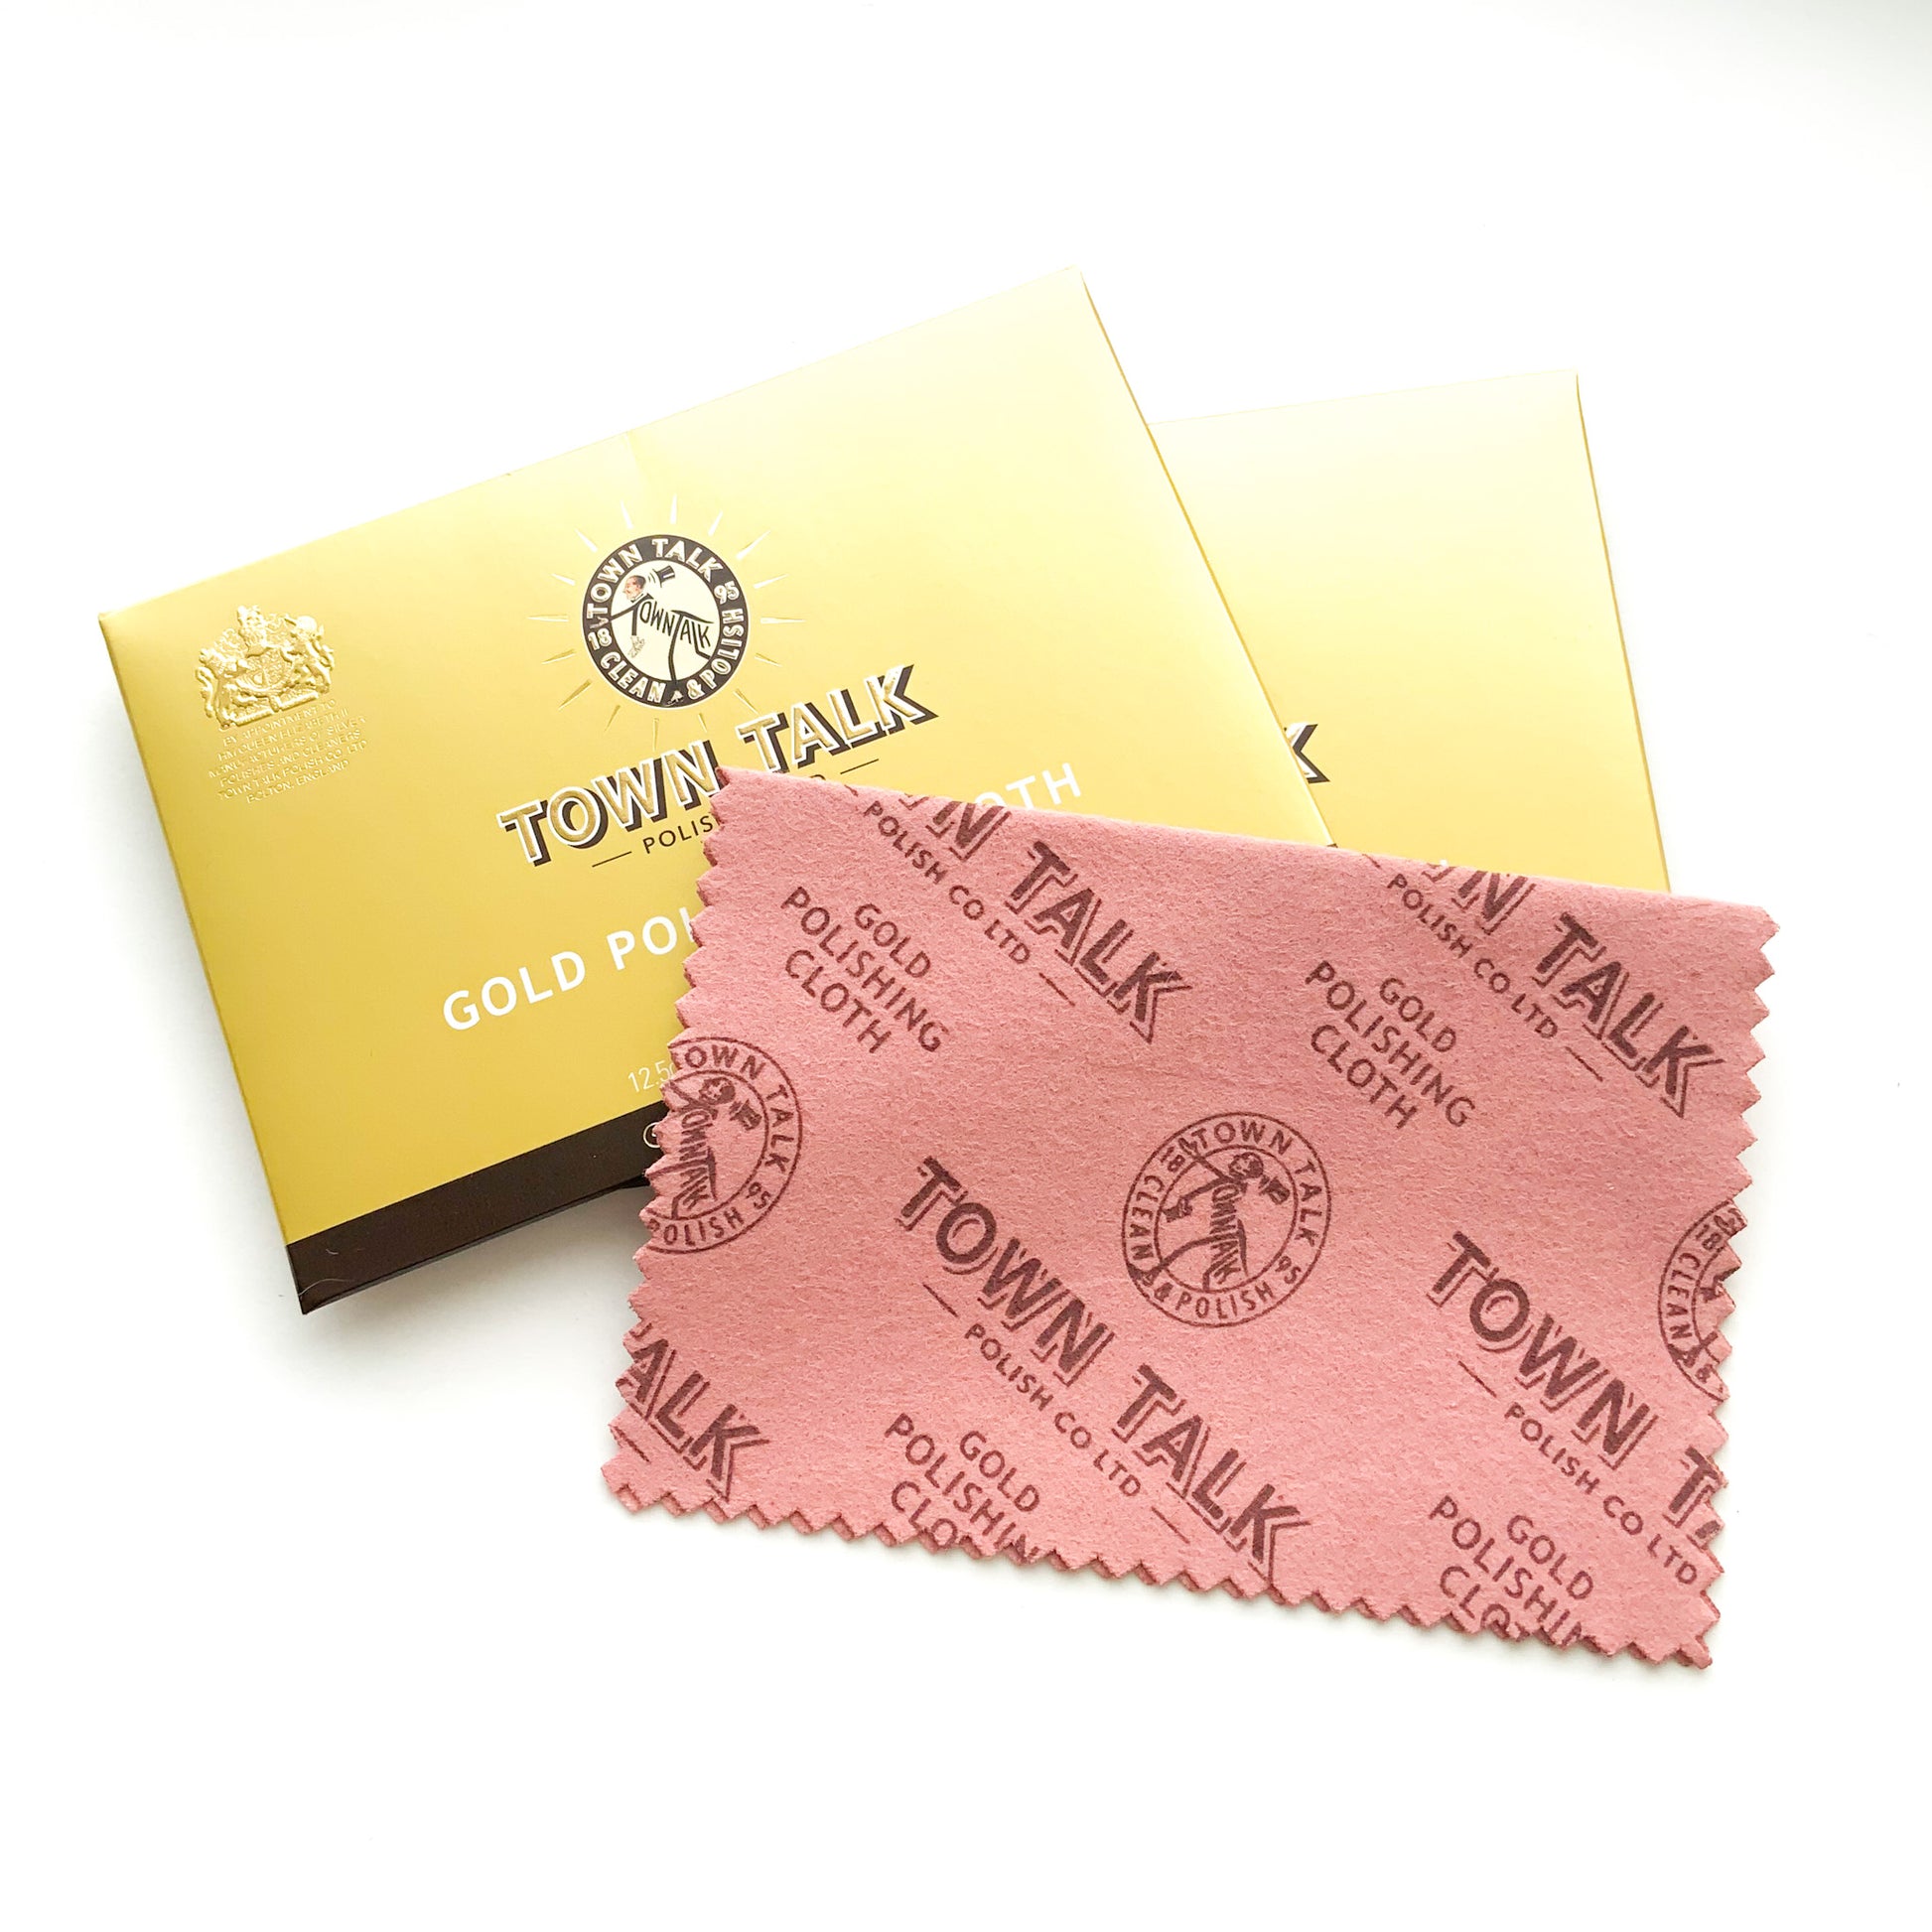 Gold polishing cloth included with order